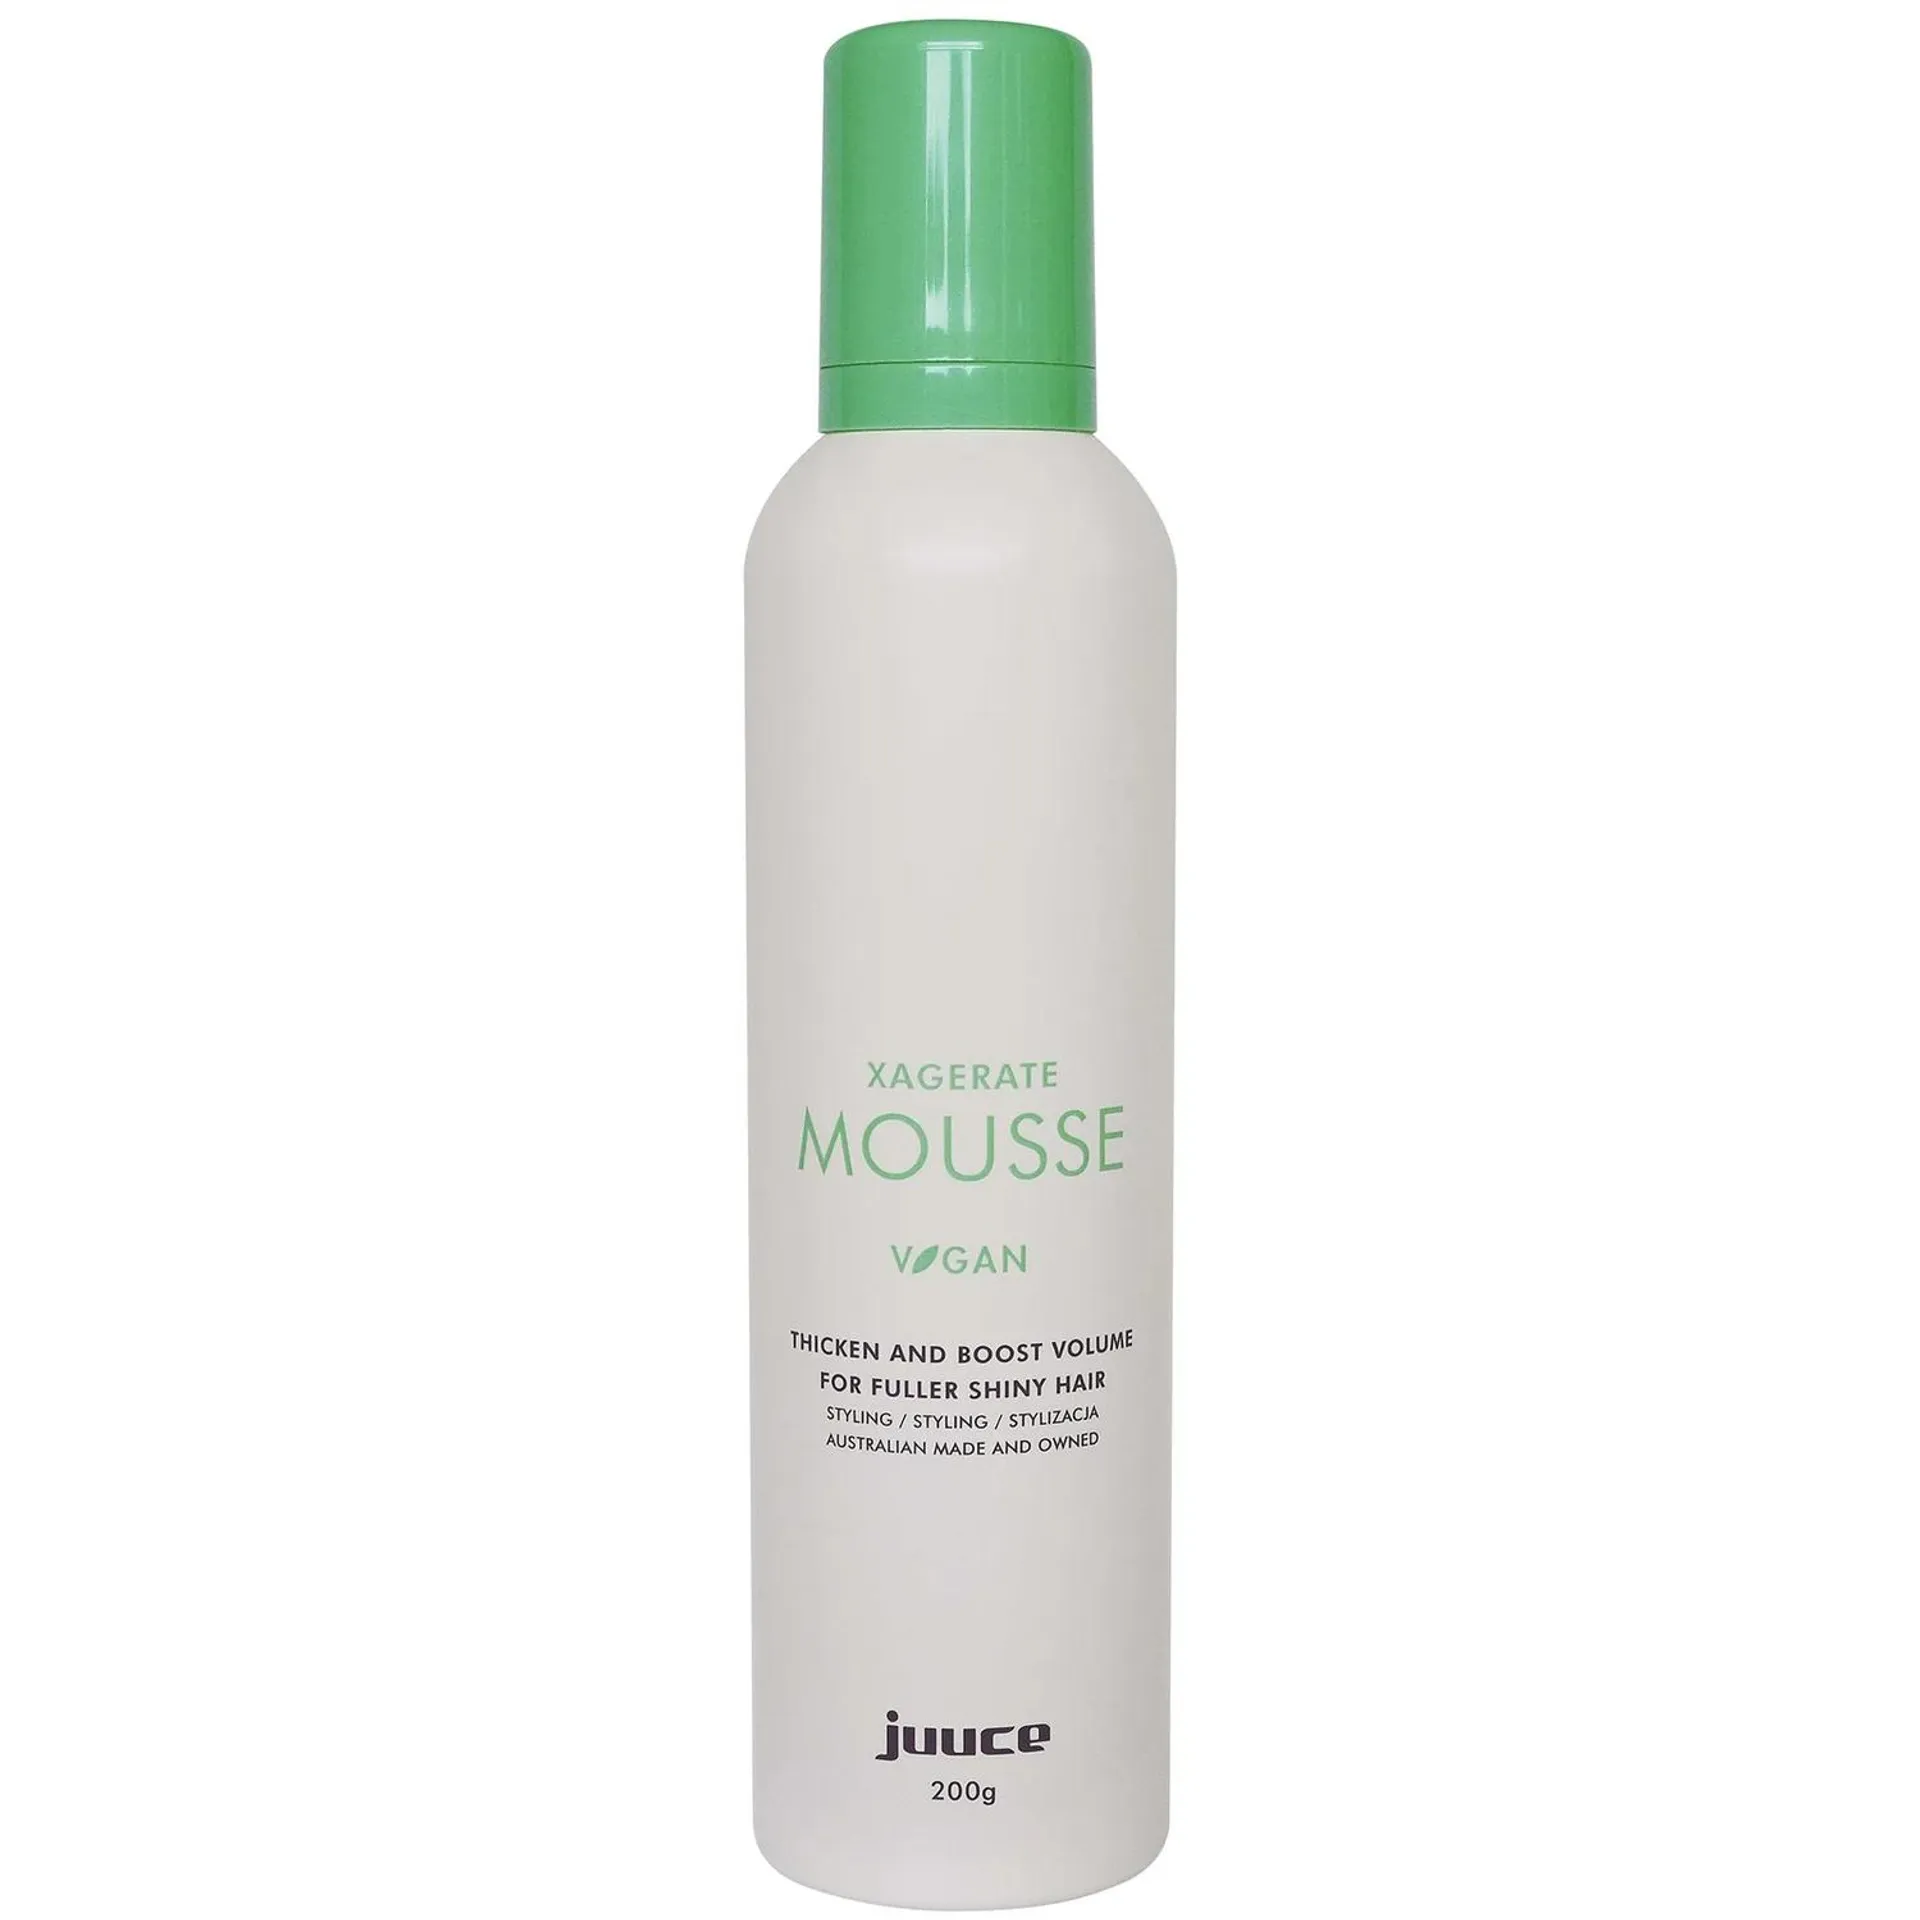 Juuce Xagerate Mousse 200g